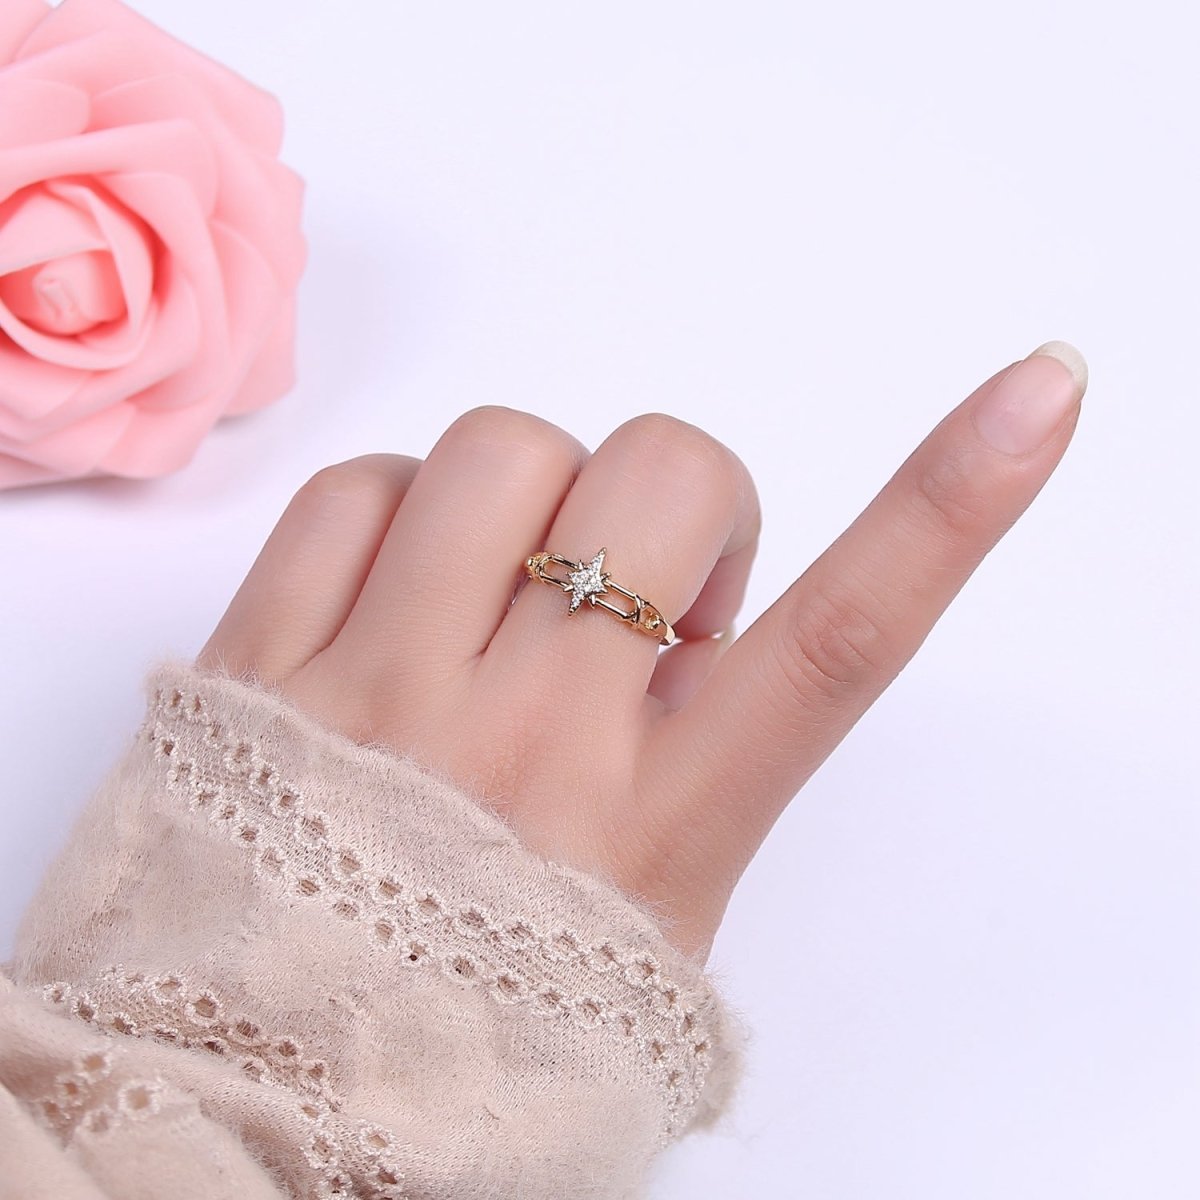 14K Gold Filled North Star Ring Celestial Ring Dainty Minimalist Jewelry Open Adjustable Ring S-456 S-457 - DLUXCA